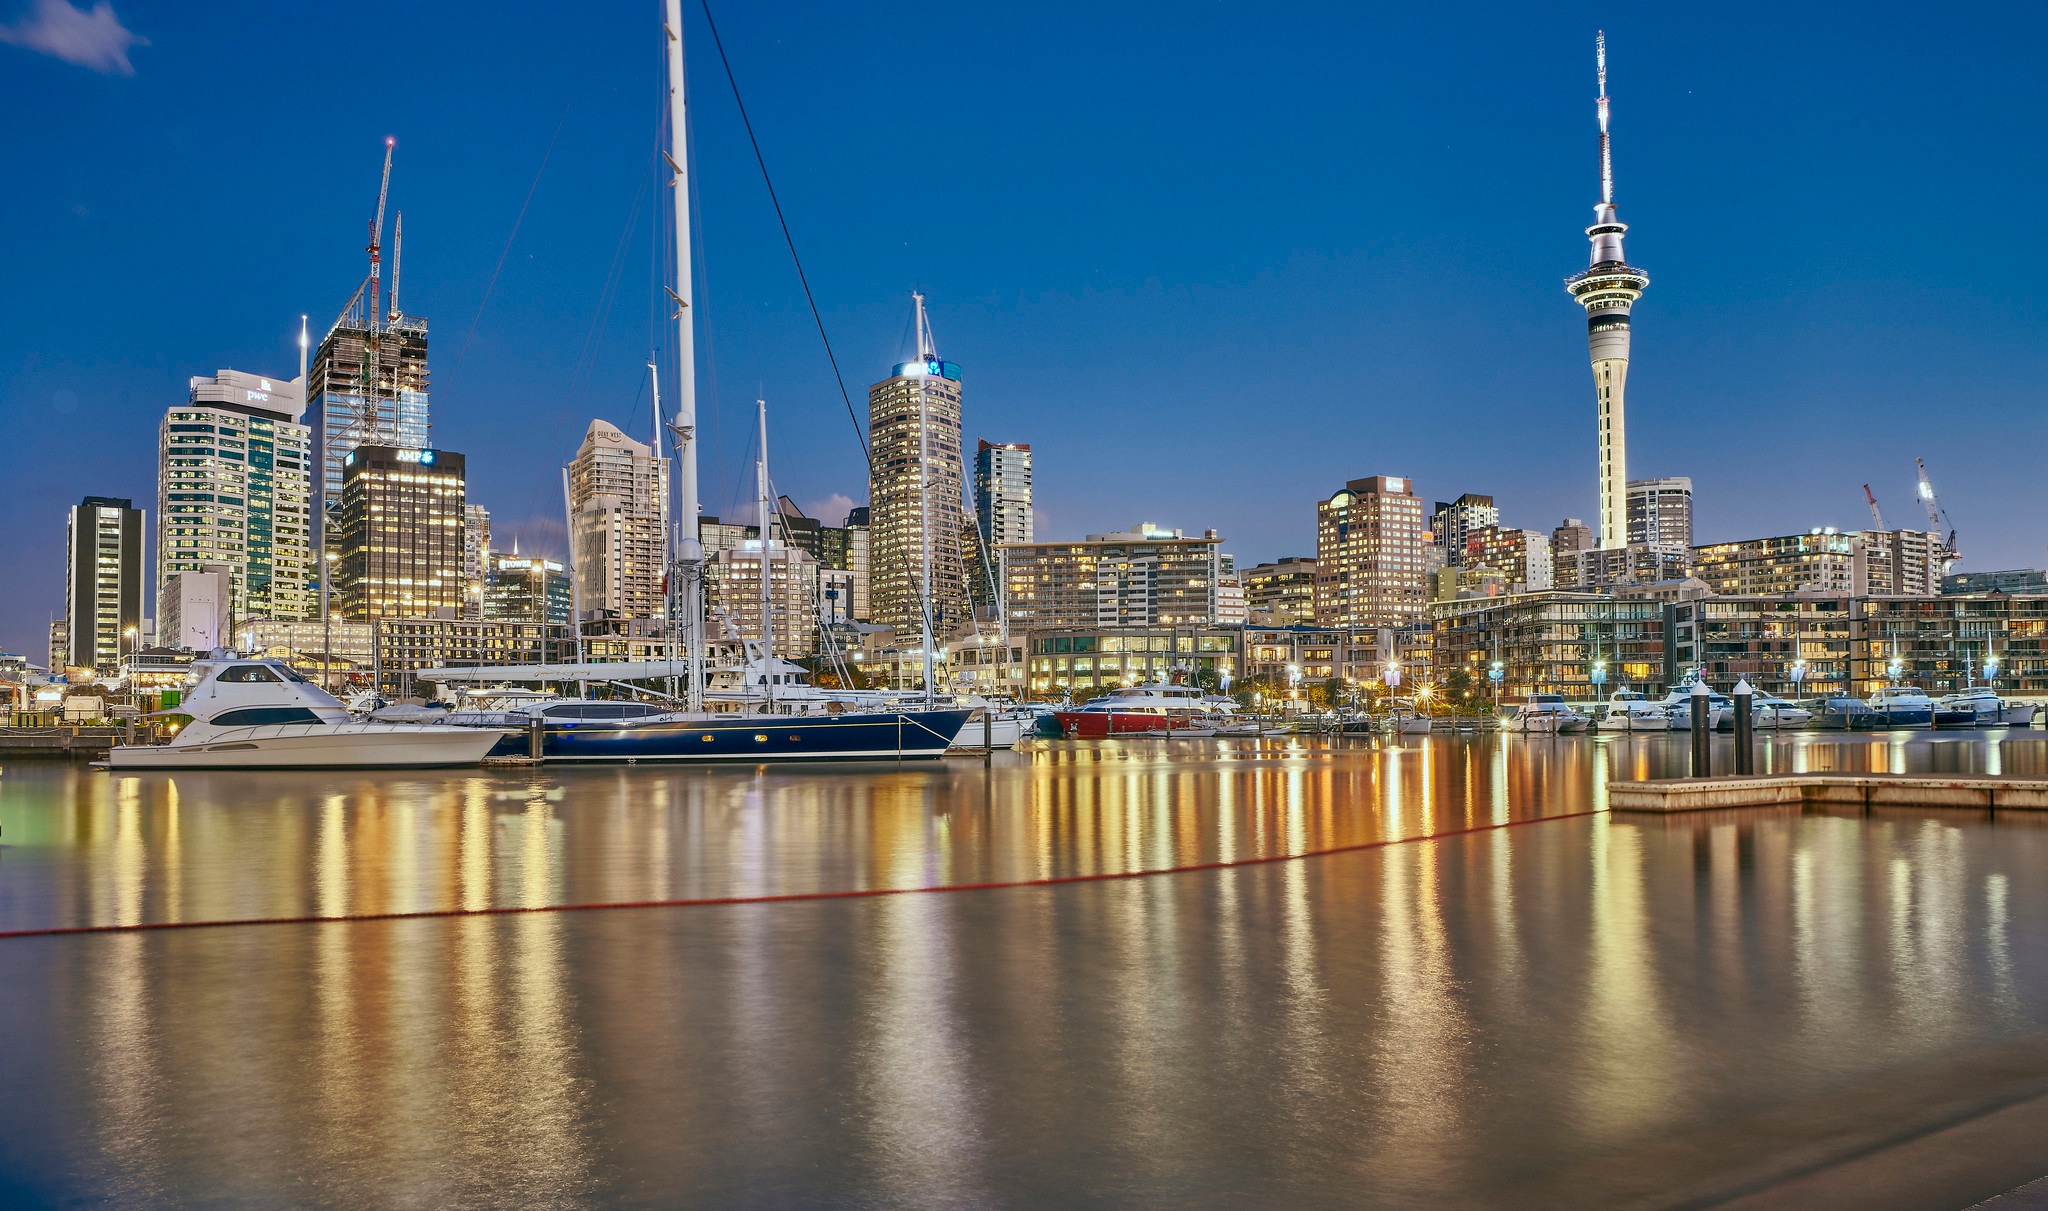 General 2048x1211 New Zealand harbor Auckland cityscape city lights